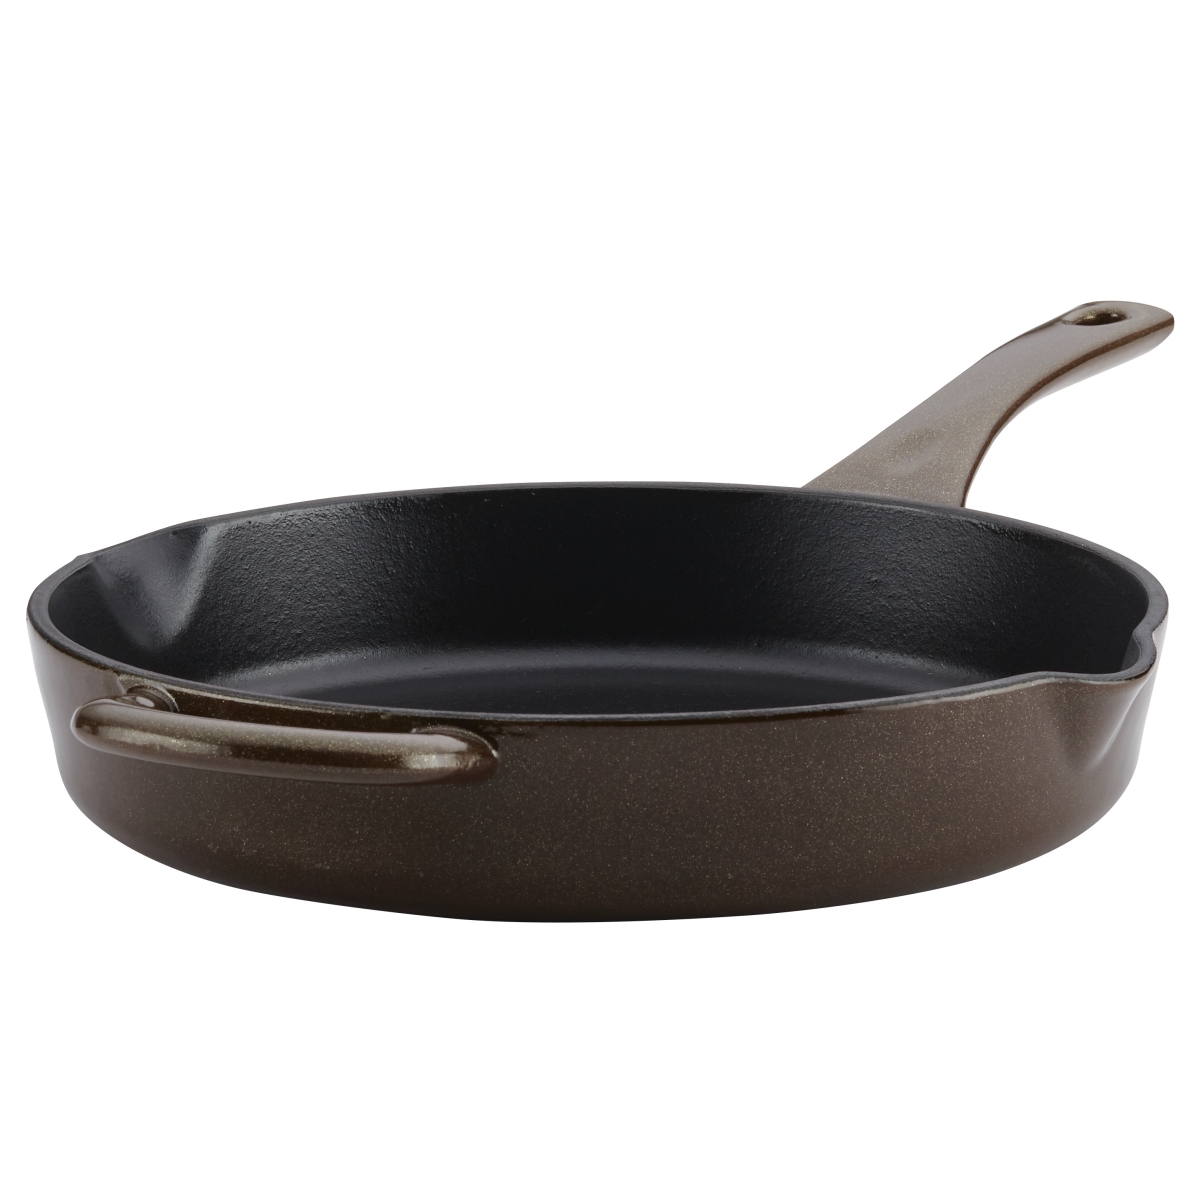 46958 Cast Iron Enamel Skillet With Pour Spouts, 10 In. - Brown Sugar